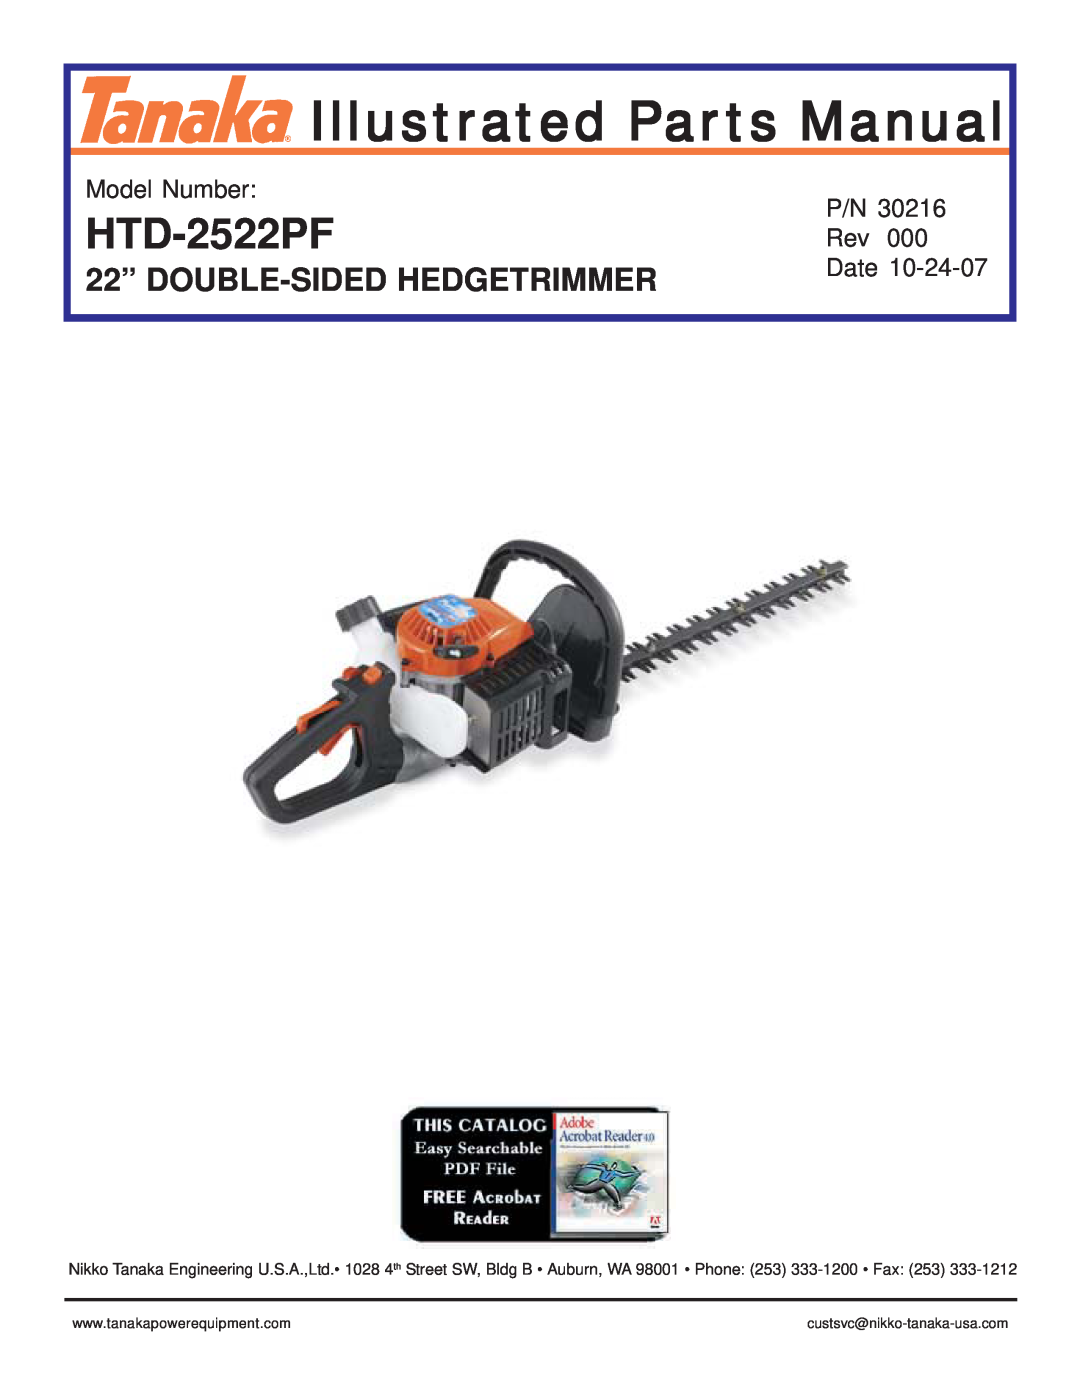 Tanaka HTD-2522PF manual Illustrated Parts Manual, 22” DOUBLE-SIDED HEDGETRIMMER, Model Number, Date 